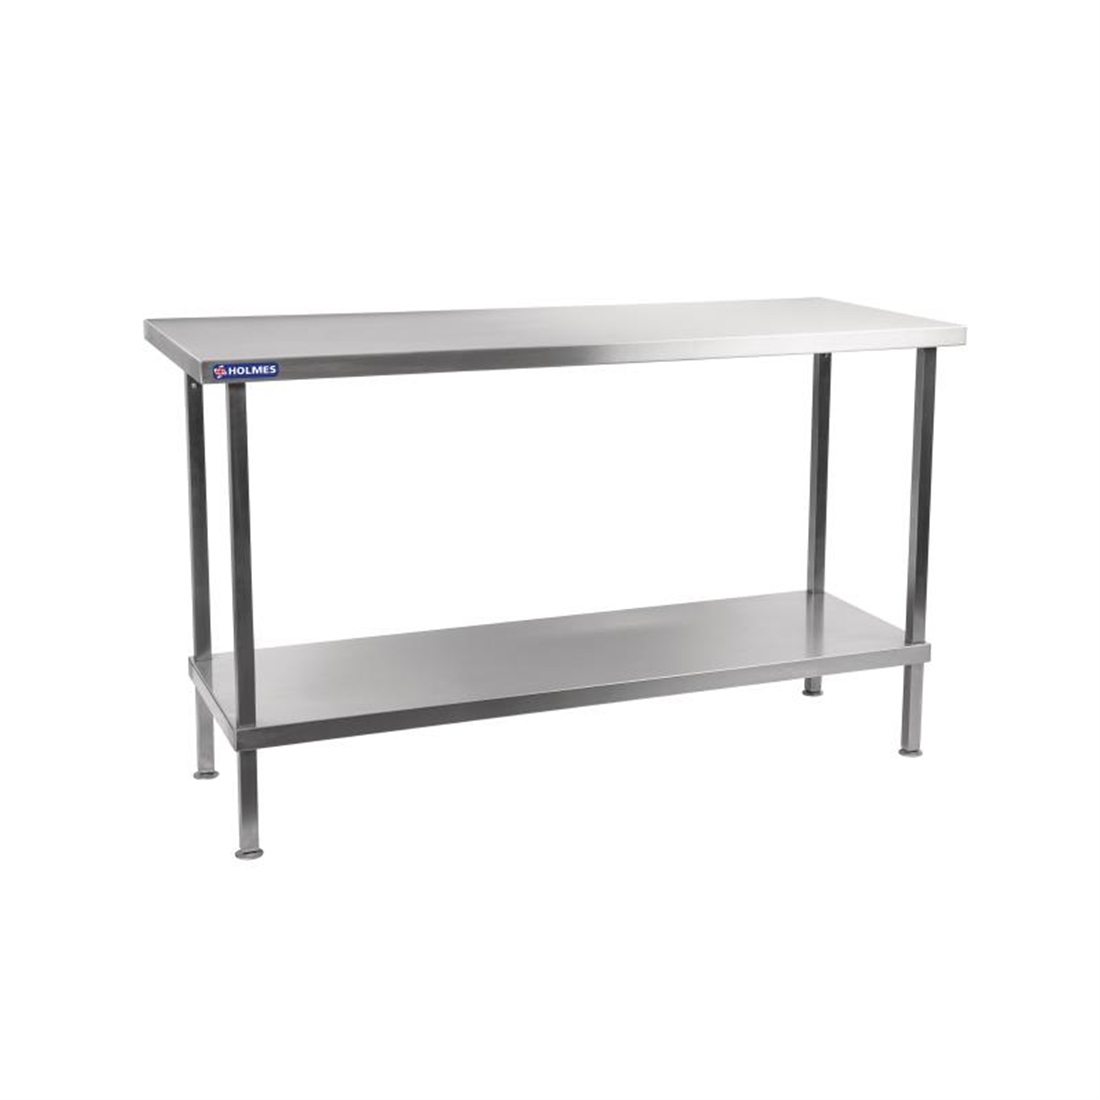 Holmes Stainless Steel Centre Table 1200mm